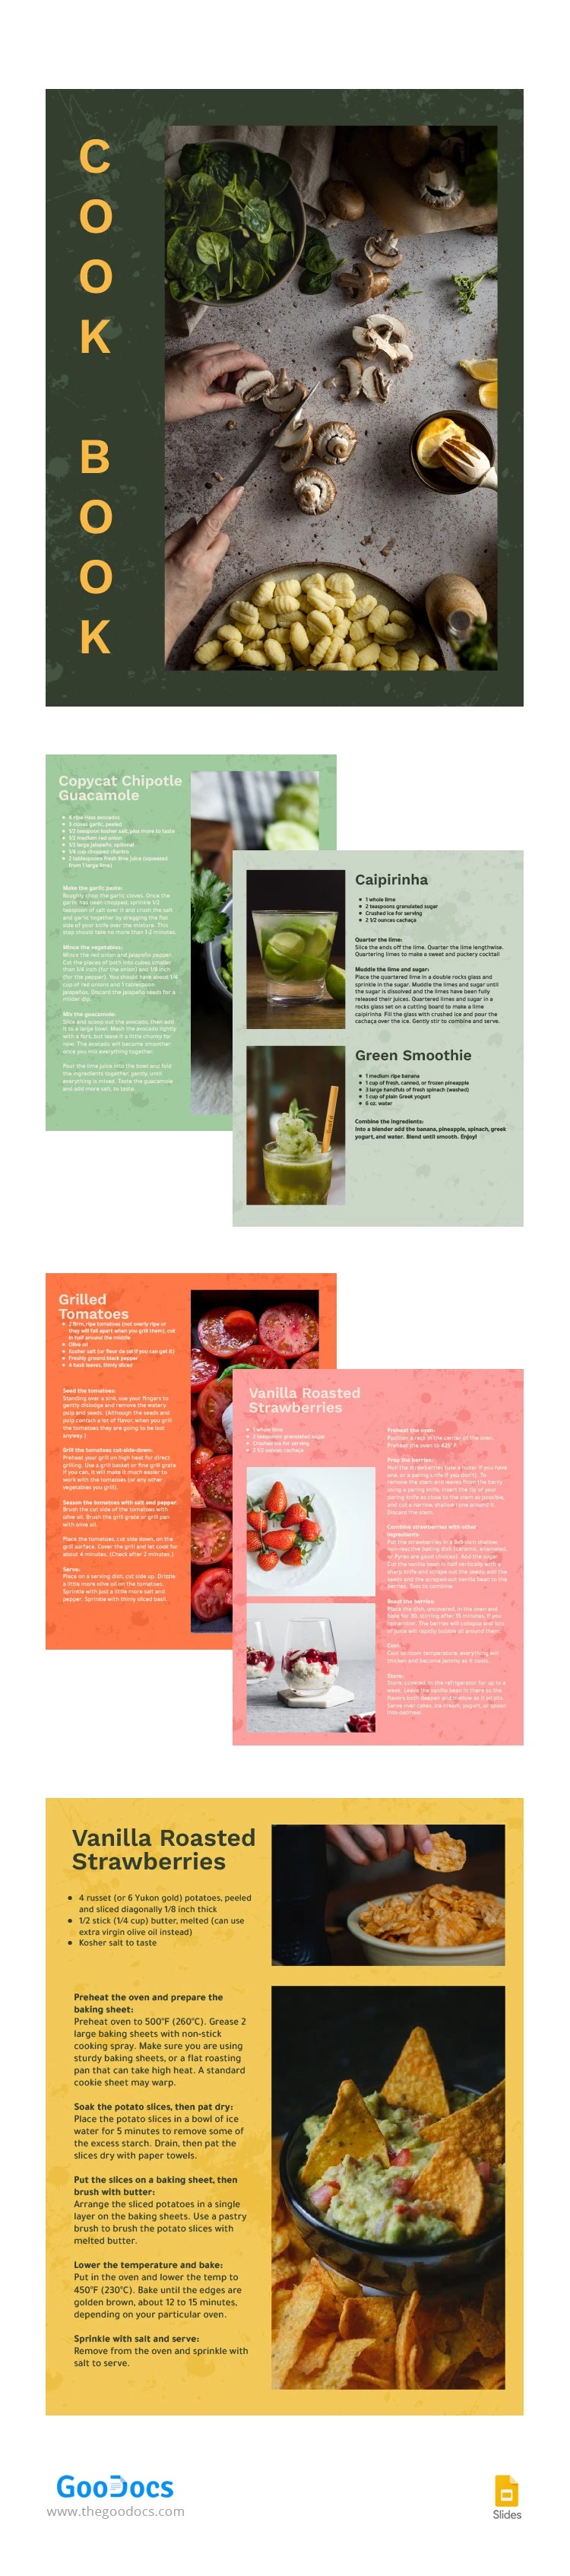 Colorful Cook Book - free Google Docs Template - 10063265